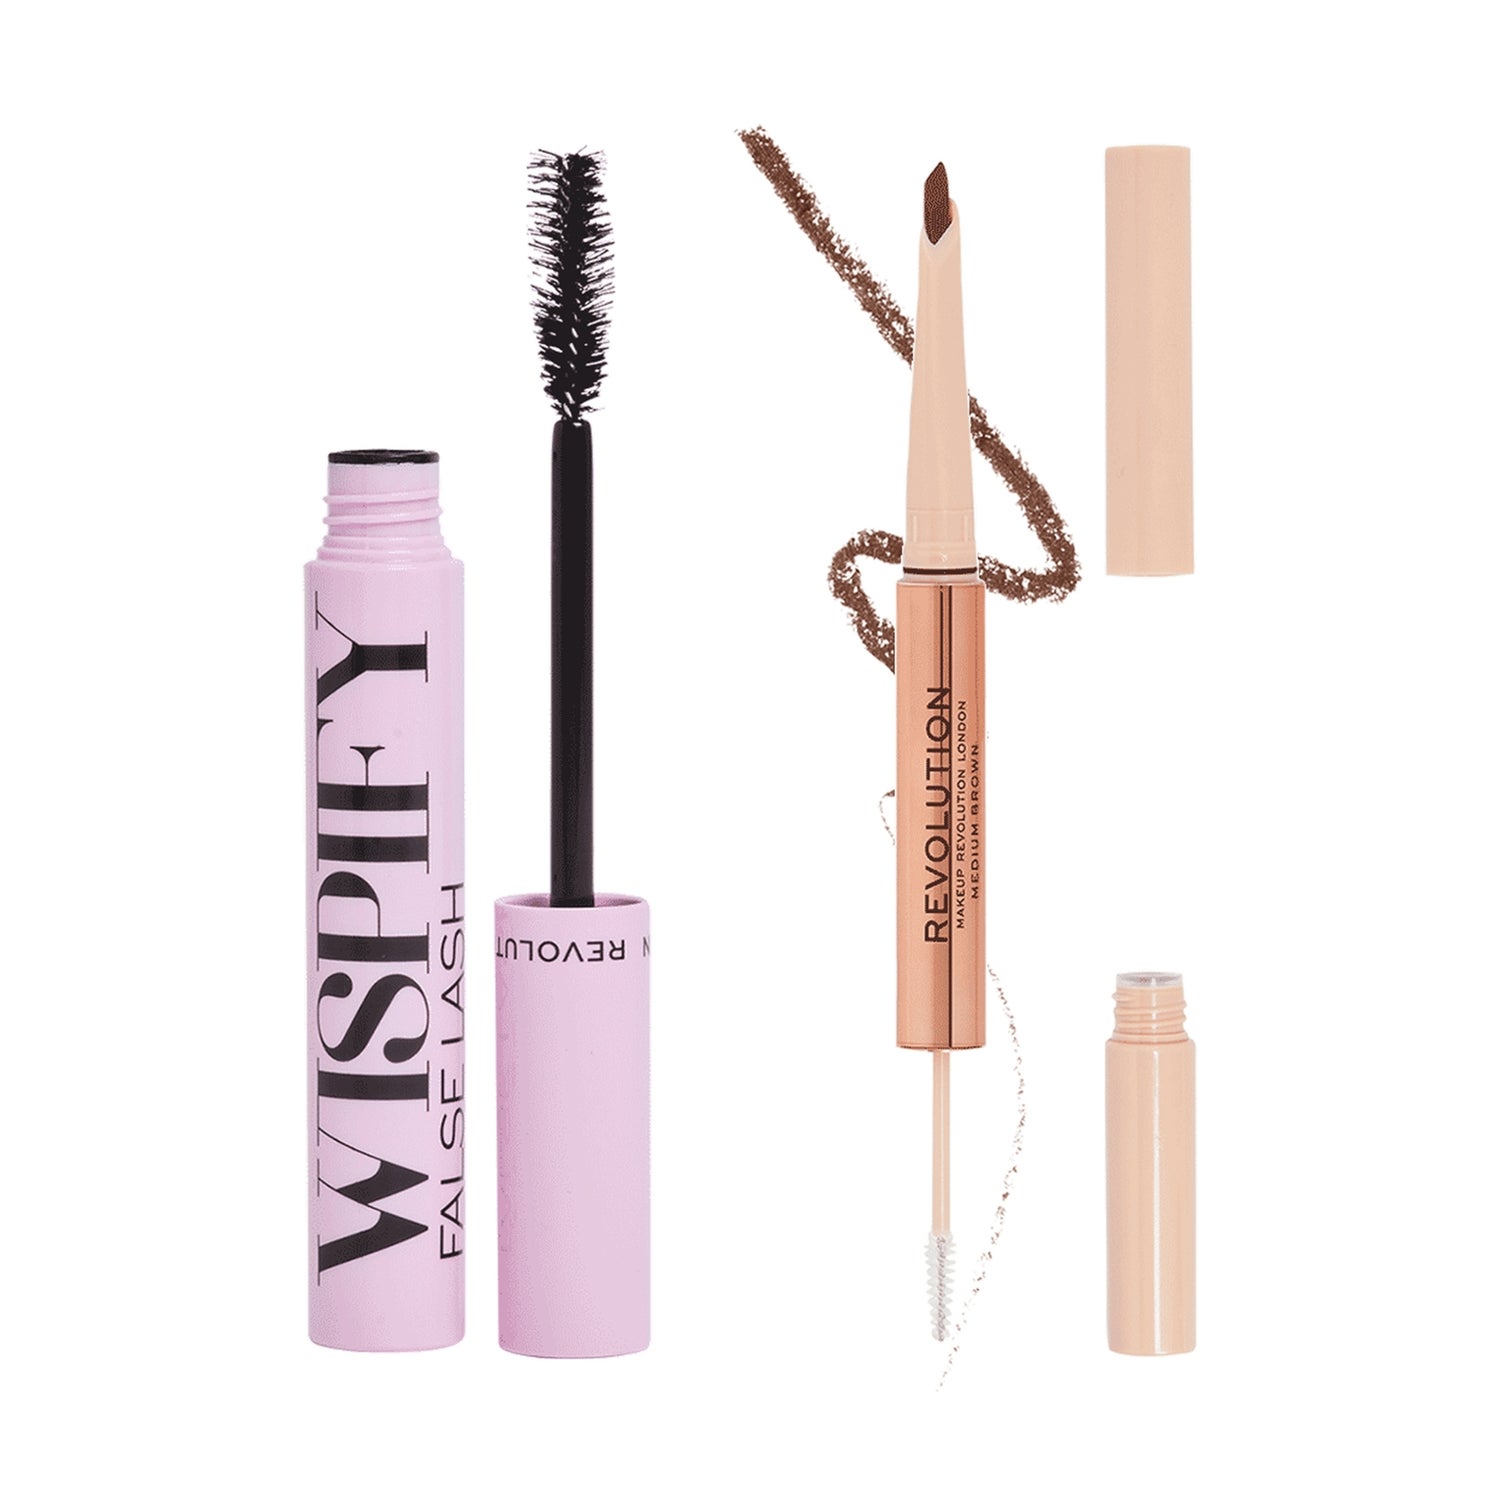 Revolution Wispify and Fluffy Brow Bundle (Various Shades)